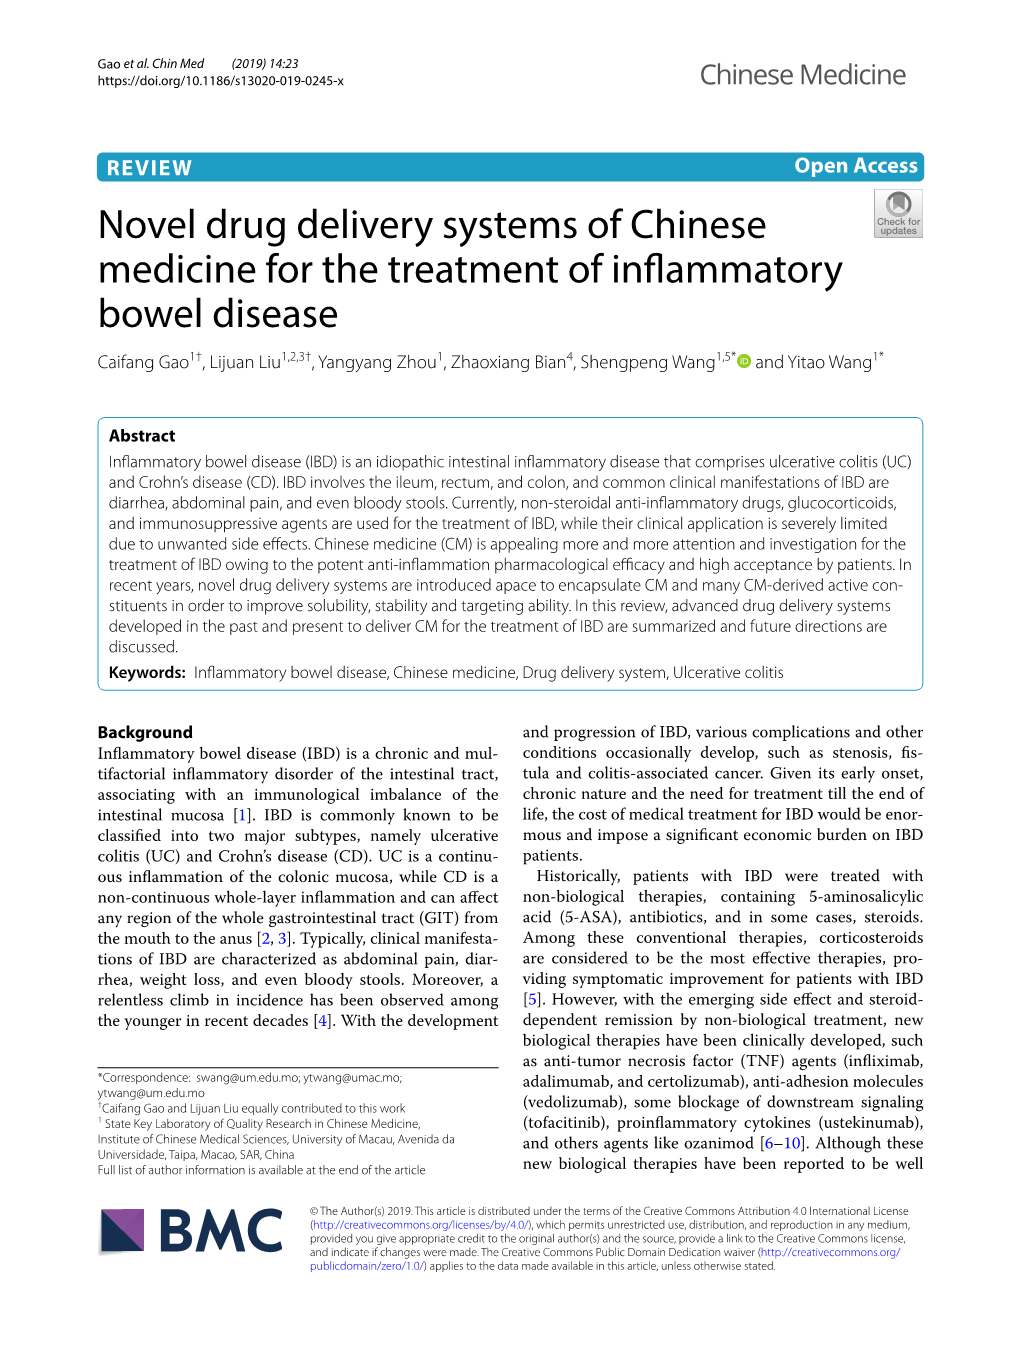 Novel Drug Delivery Systems of Chinese Medicine for the Treatment